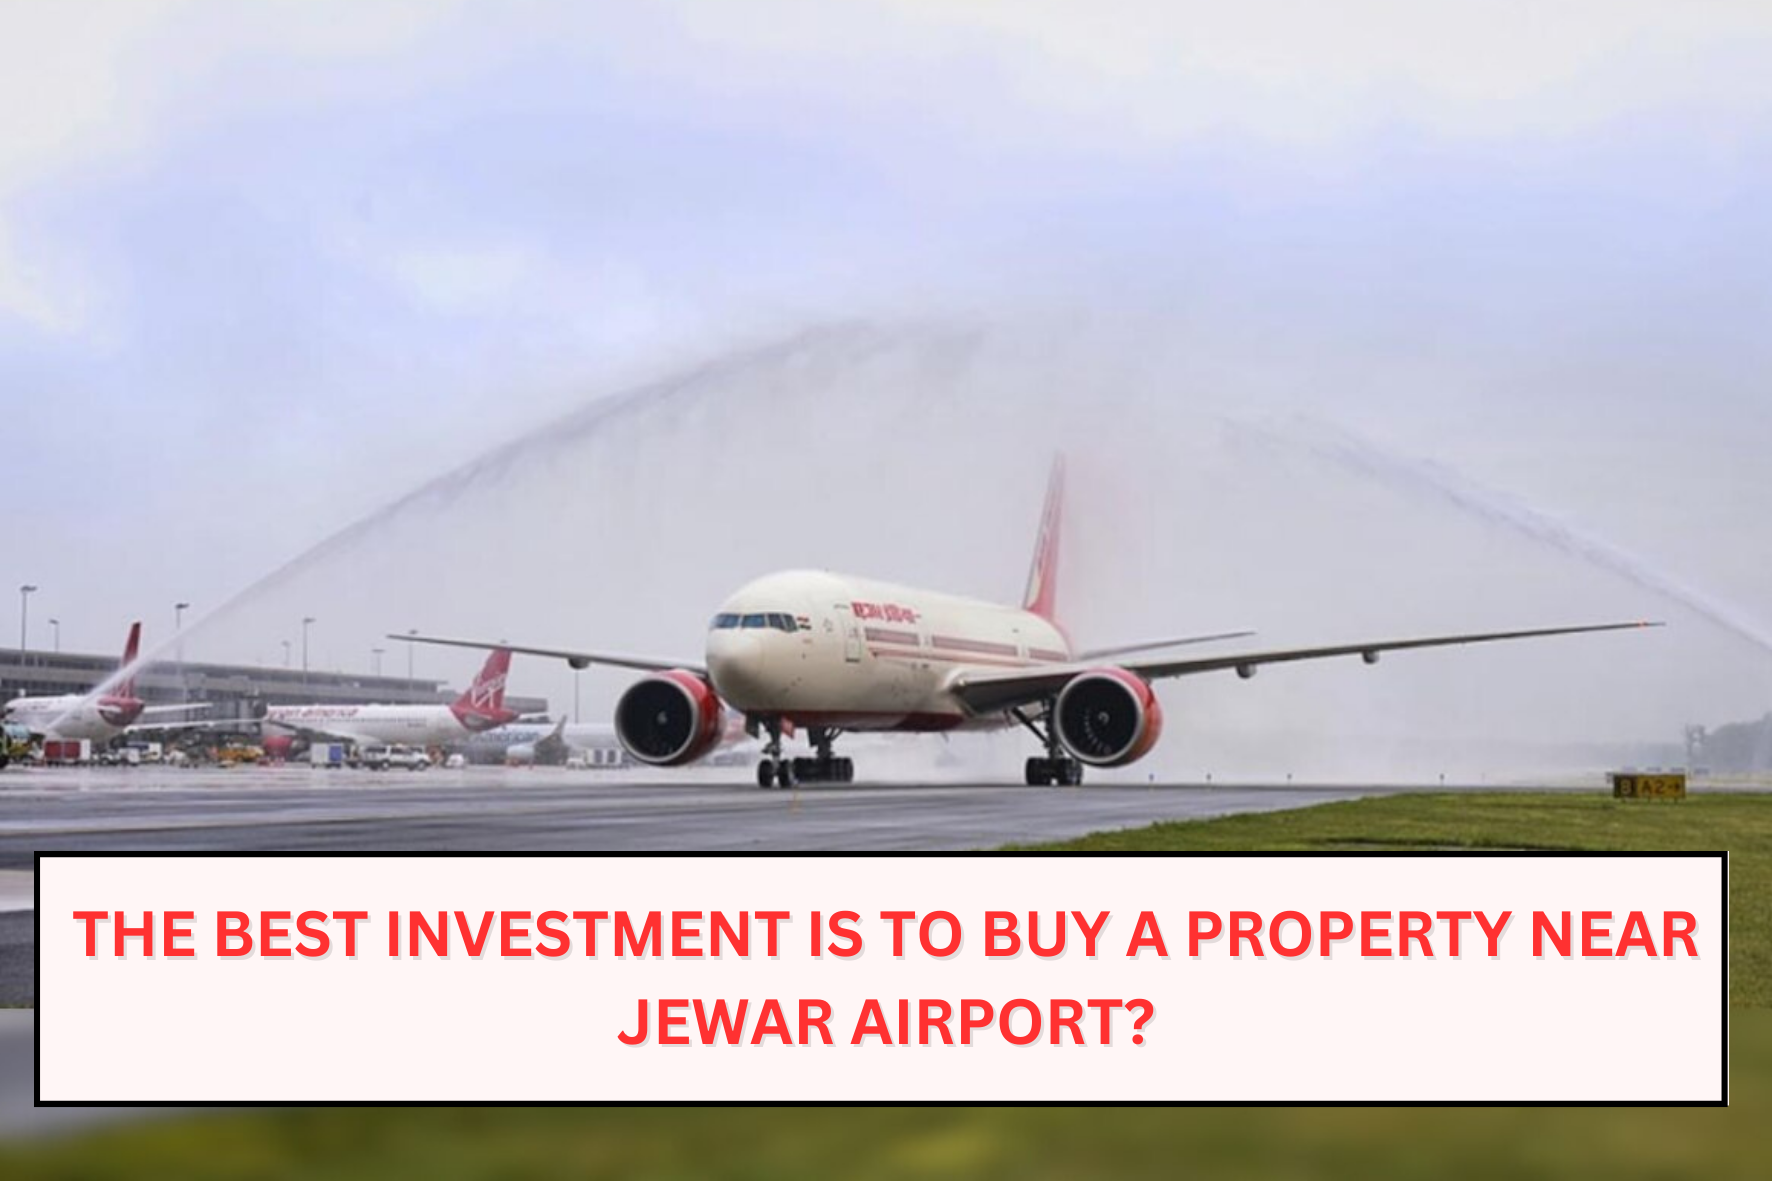 uploads/blog/The_best_investment_is_to_buy_a_property_near_Jewar_Airport.png